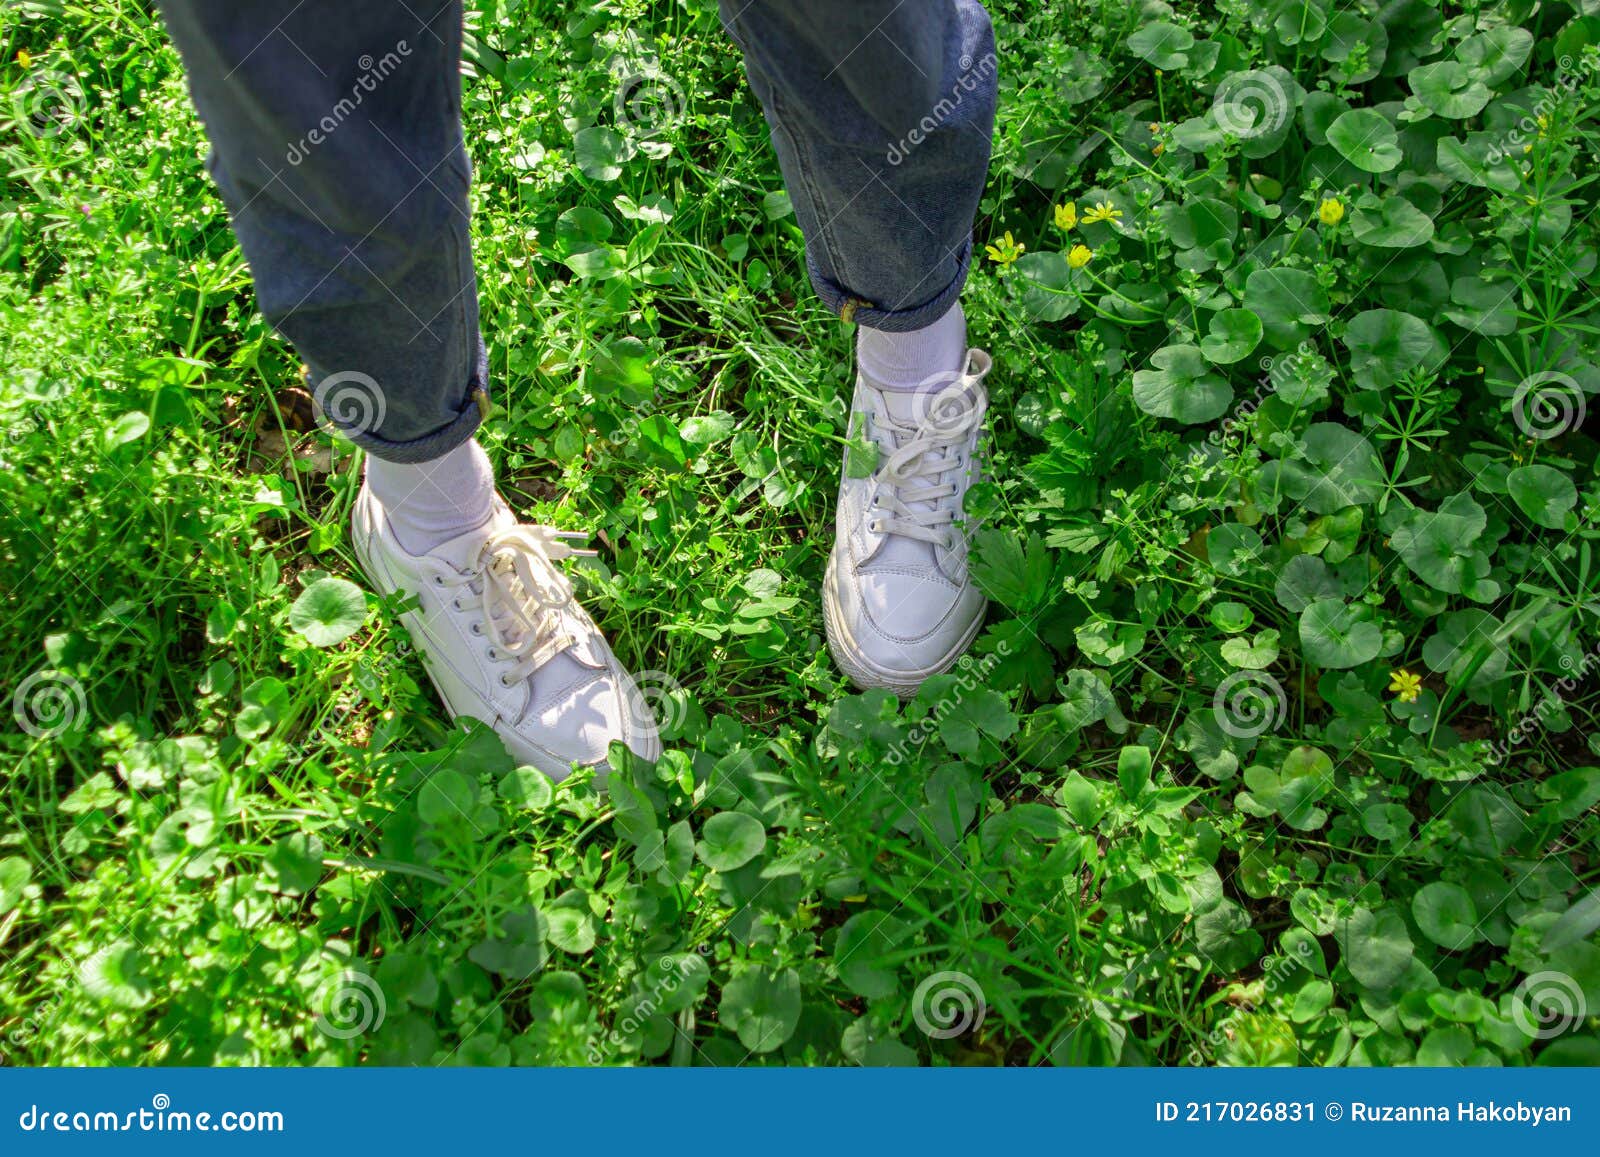 Legs in Gym Shoes on Green Grass. Stock Image - Image of grass, feet ...